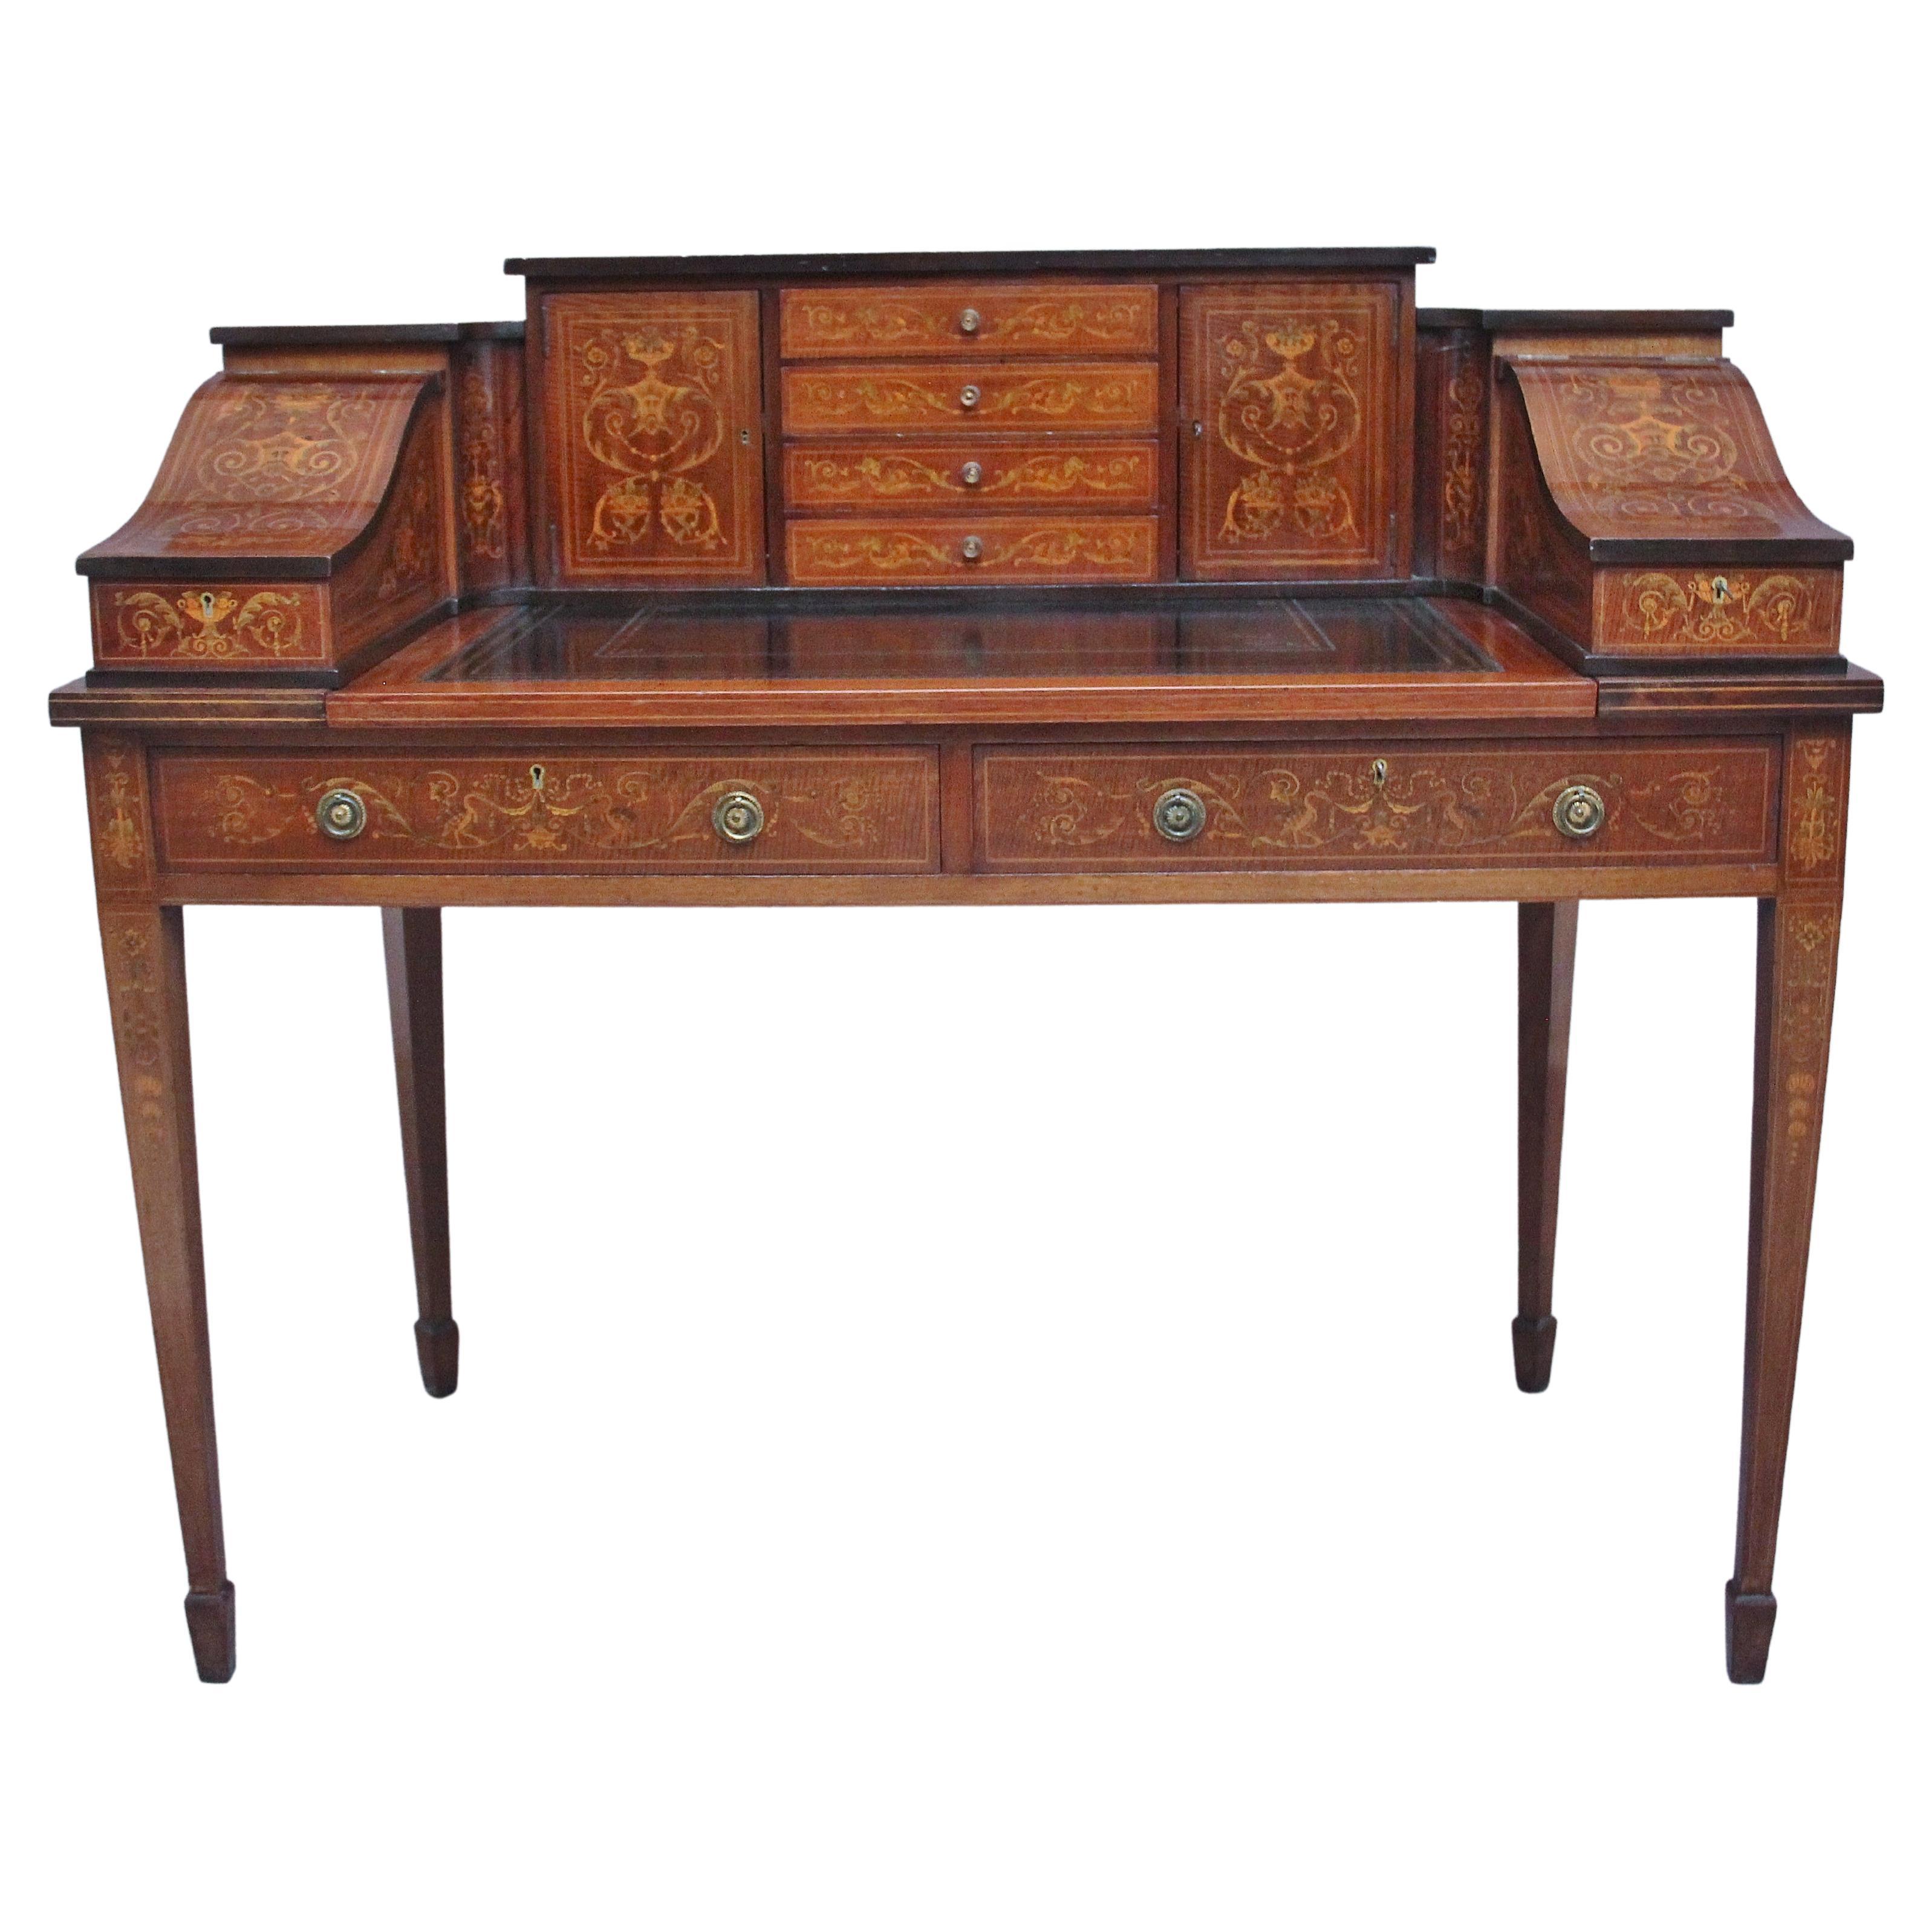 Fabulous Quality Early 20th Century Mahogany and Inlaid Carlton House Desk